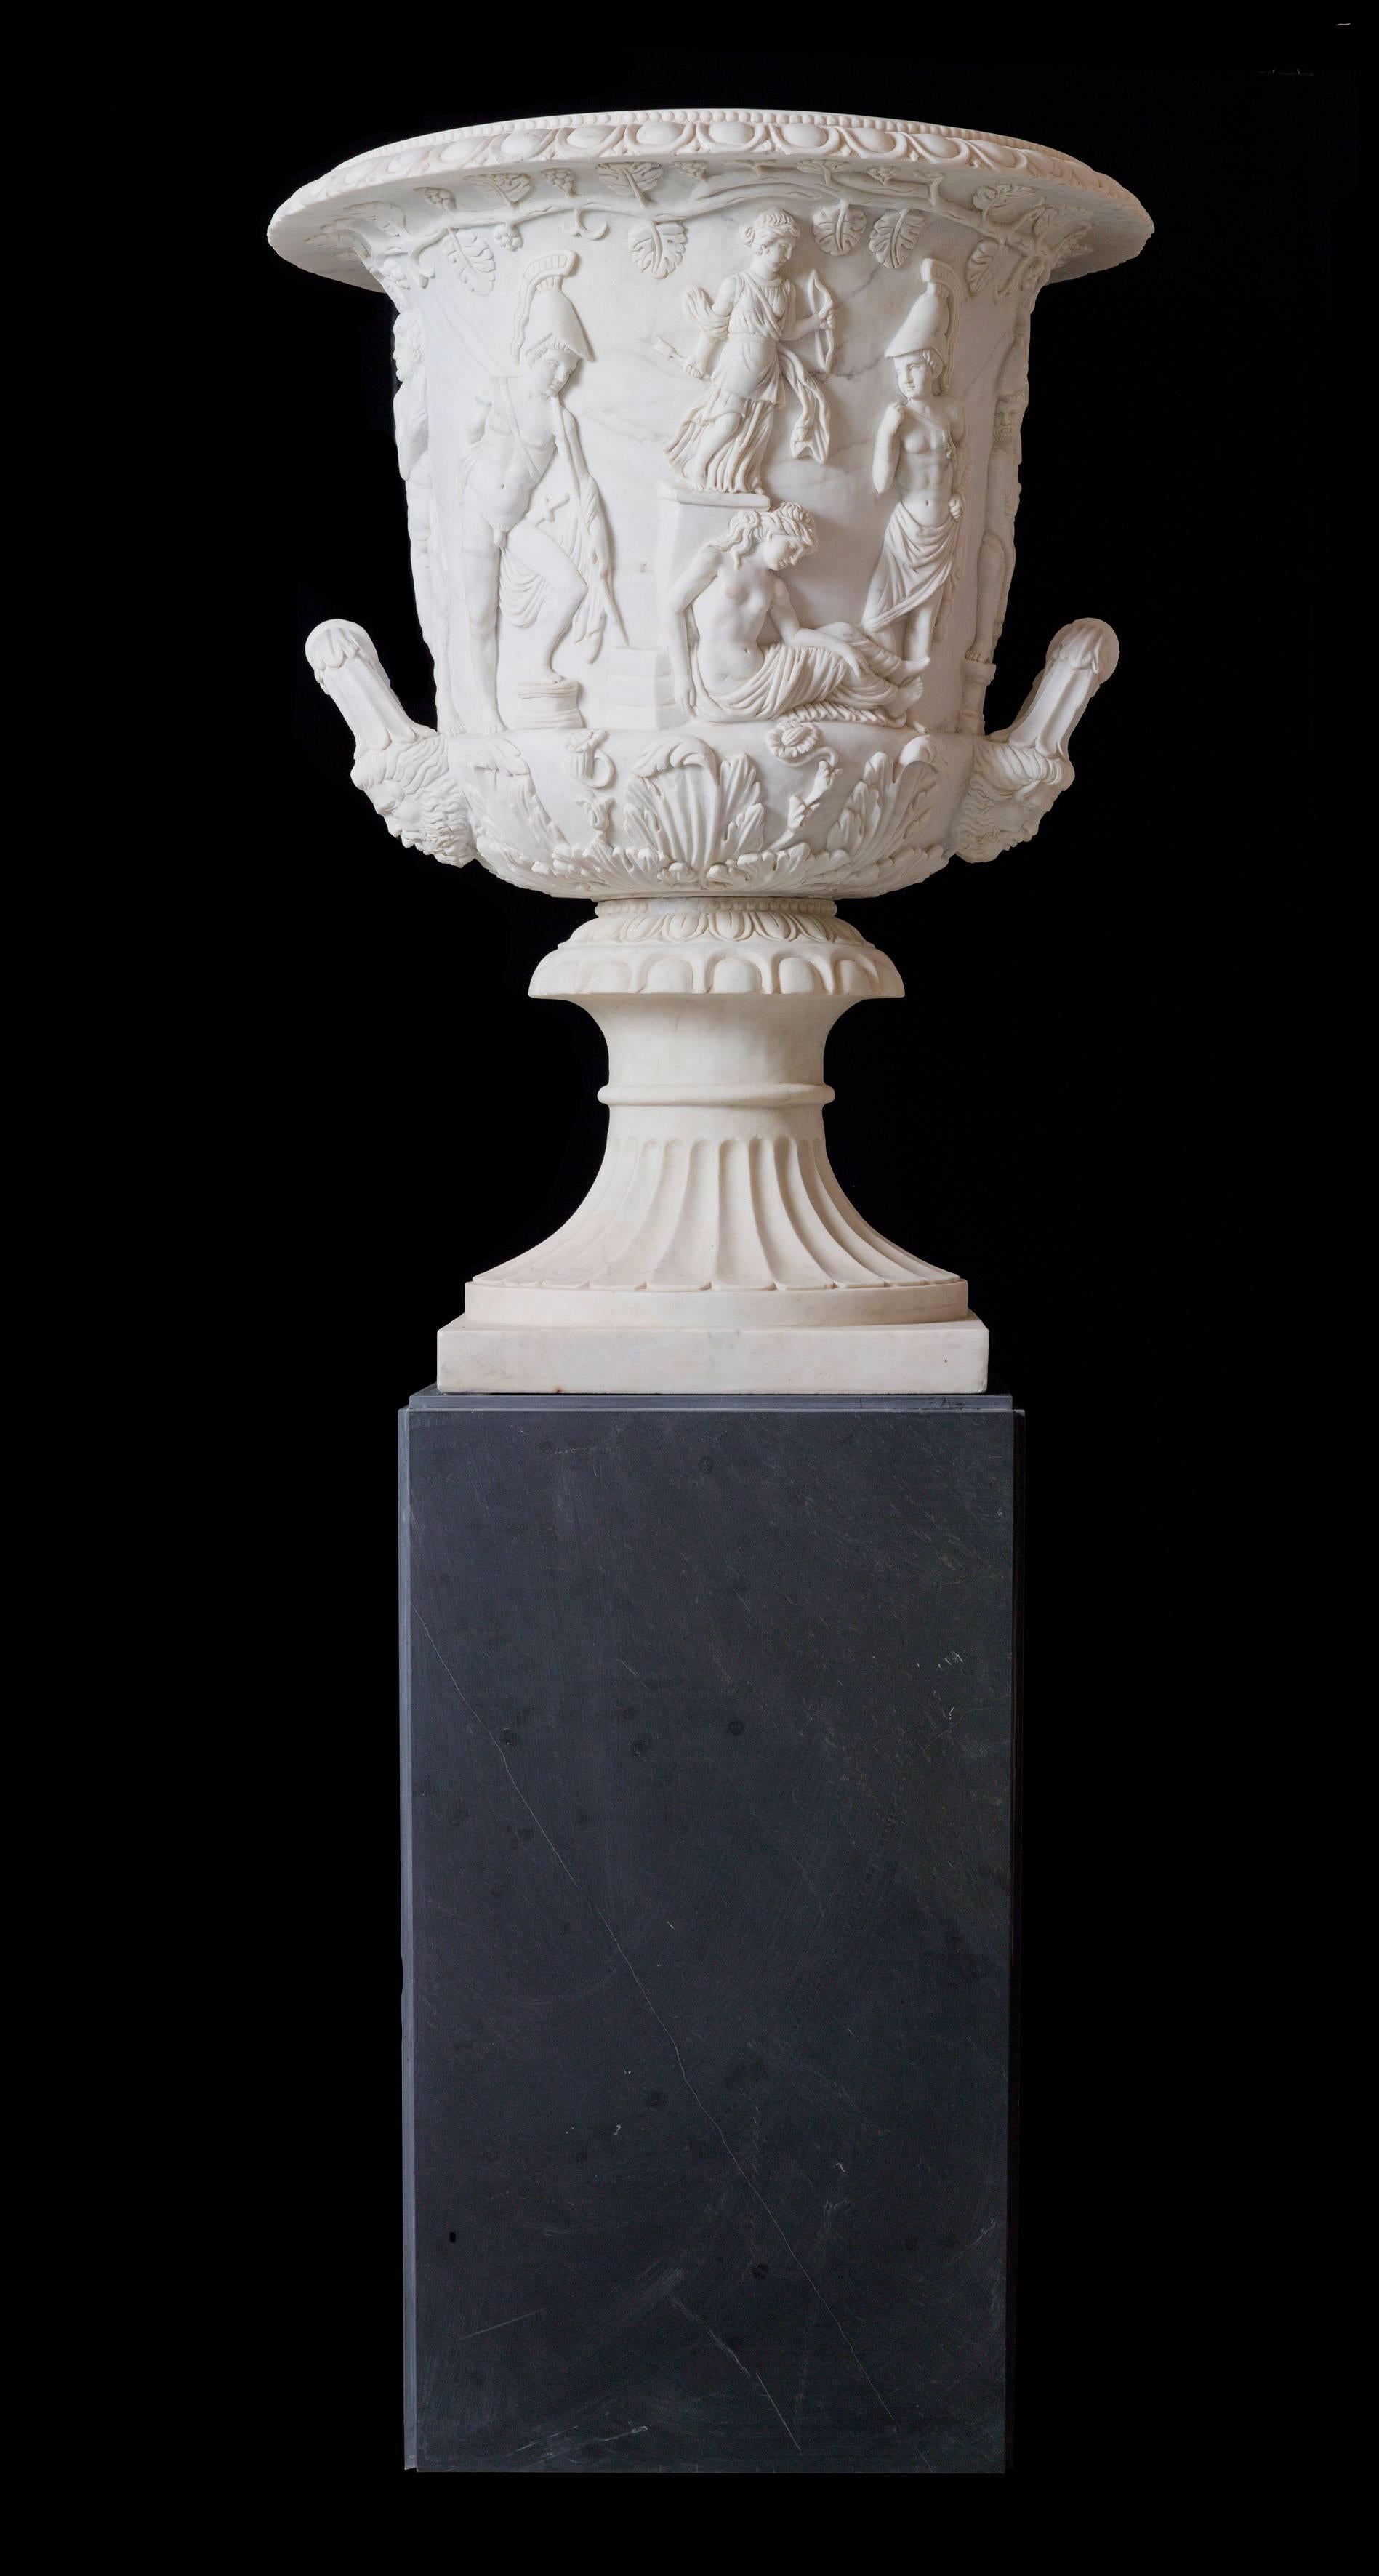 Monumental re-edition of the famous Medici Vase, stored inside the uffizi gallery. Originally founded in Rome at Villa Medici this superb vase, this vase celebrate the heroes warriors perhaps Agamennone, Achilles and Odisseo.
Copies of the